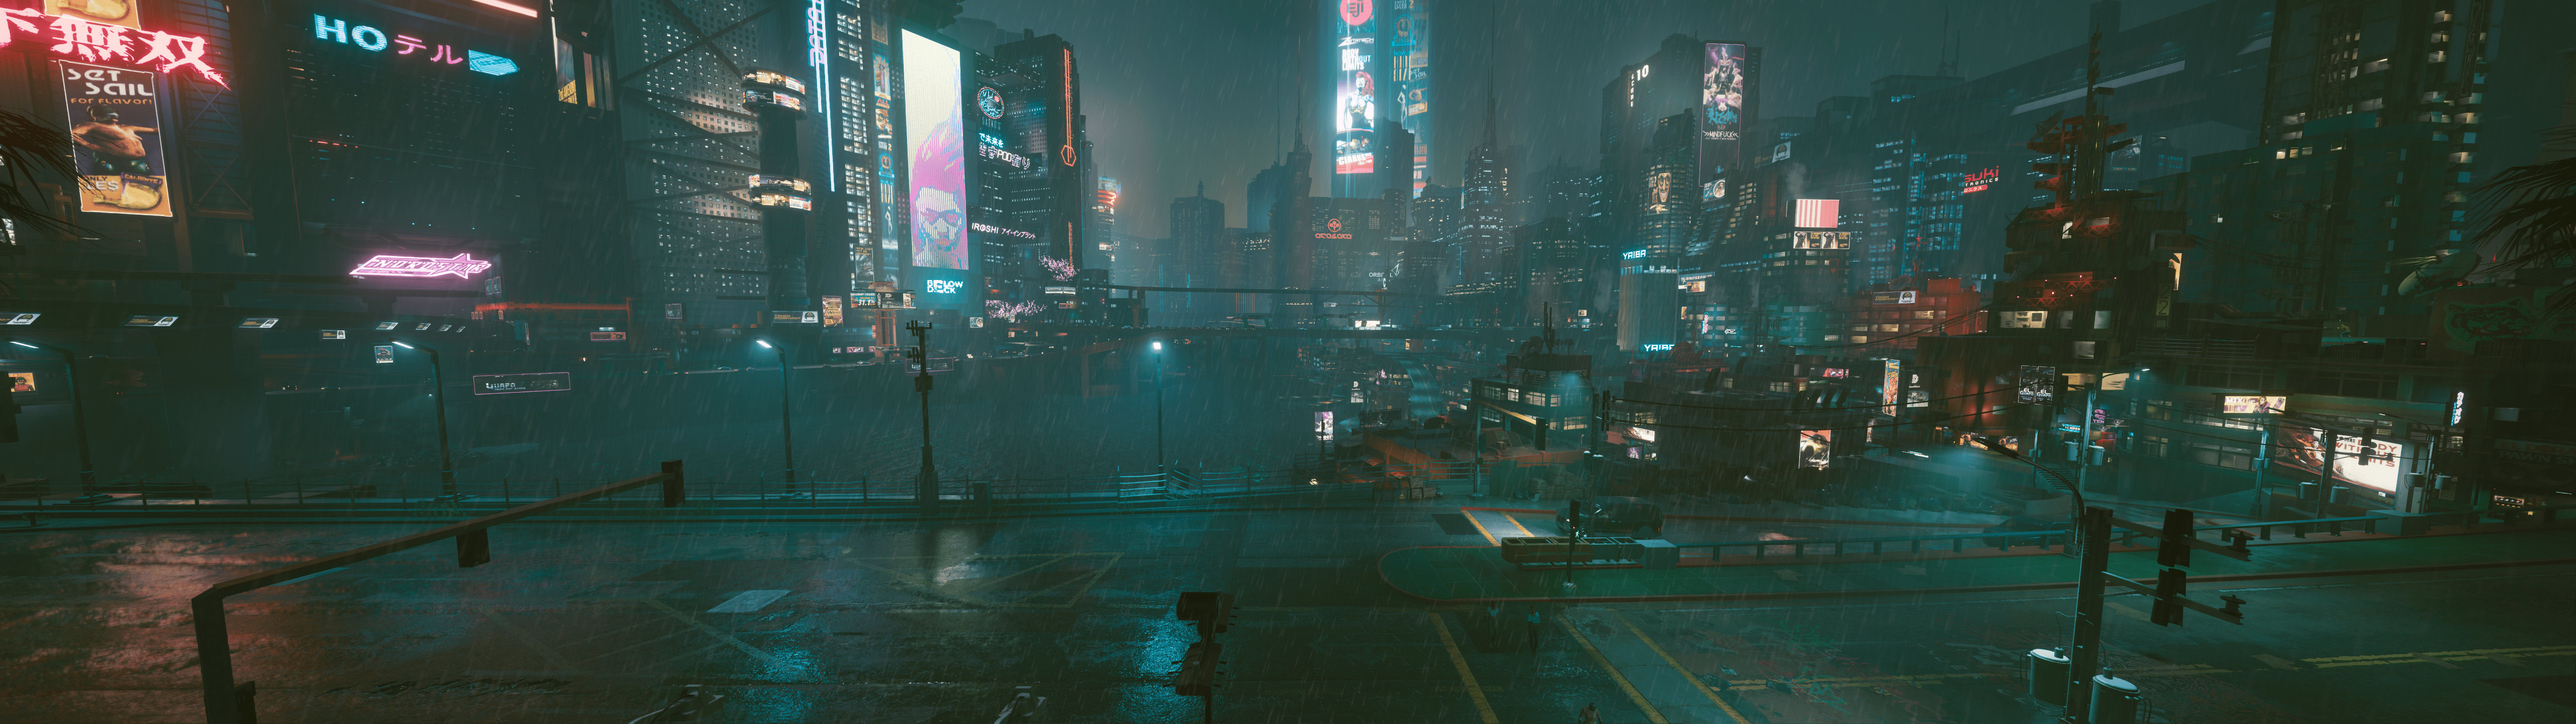 A cyberpunk city at night with neon lights - 5120x1440